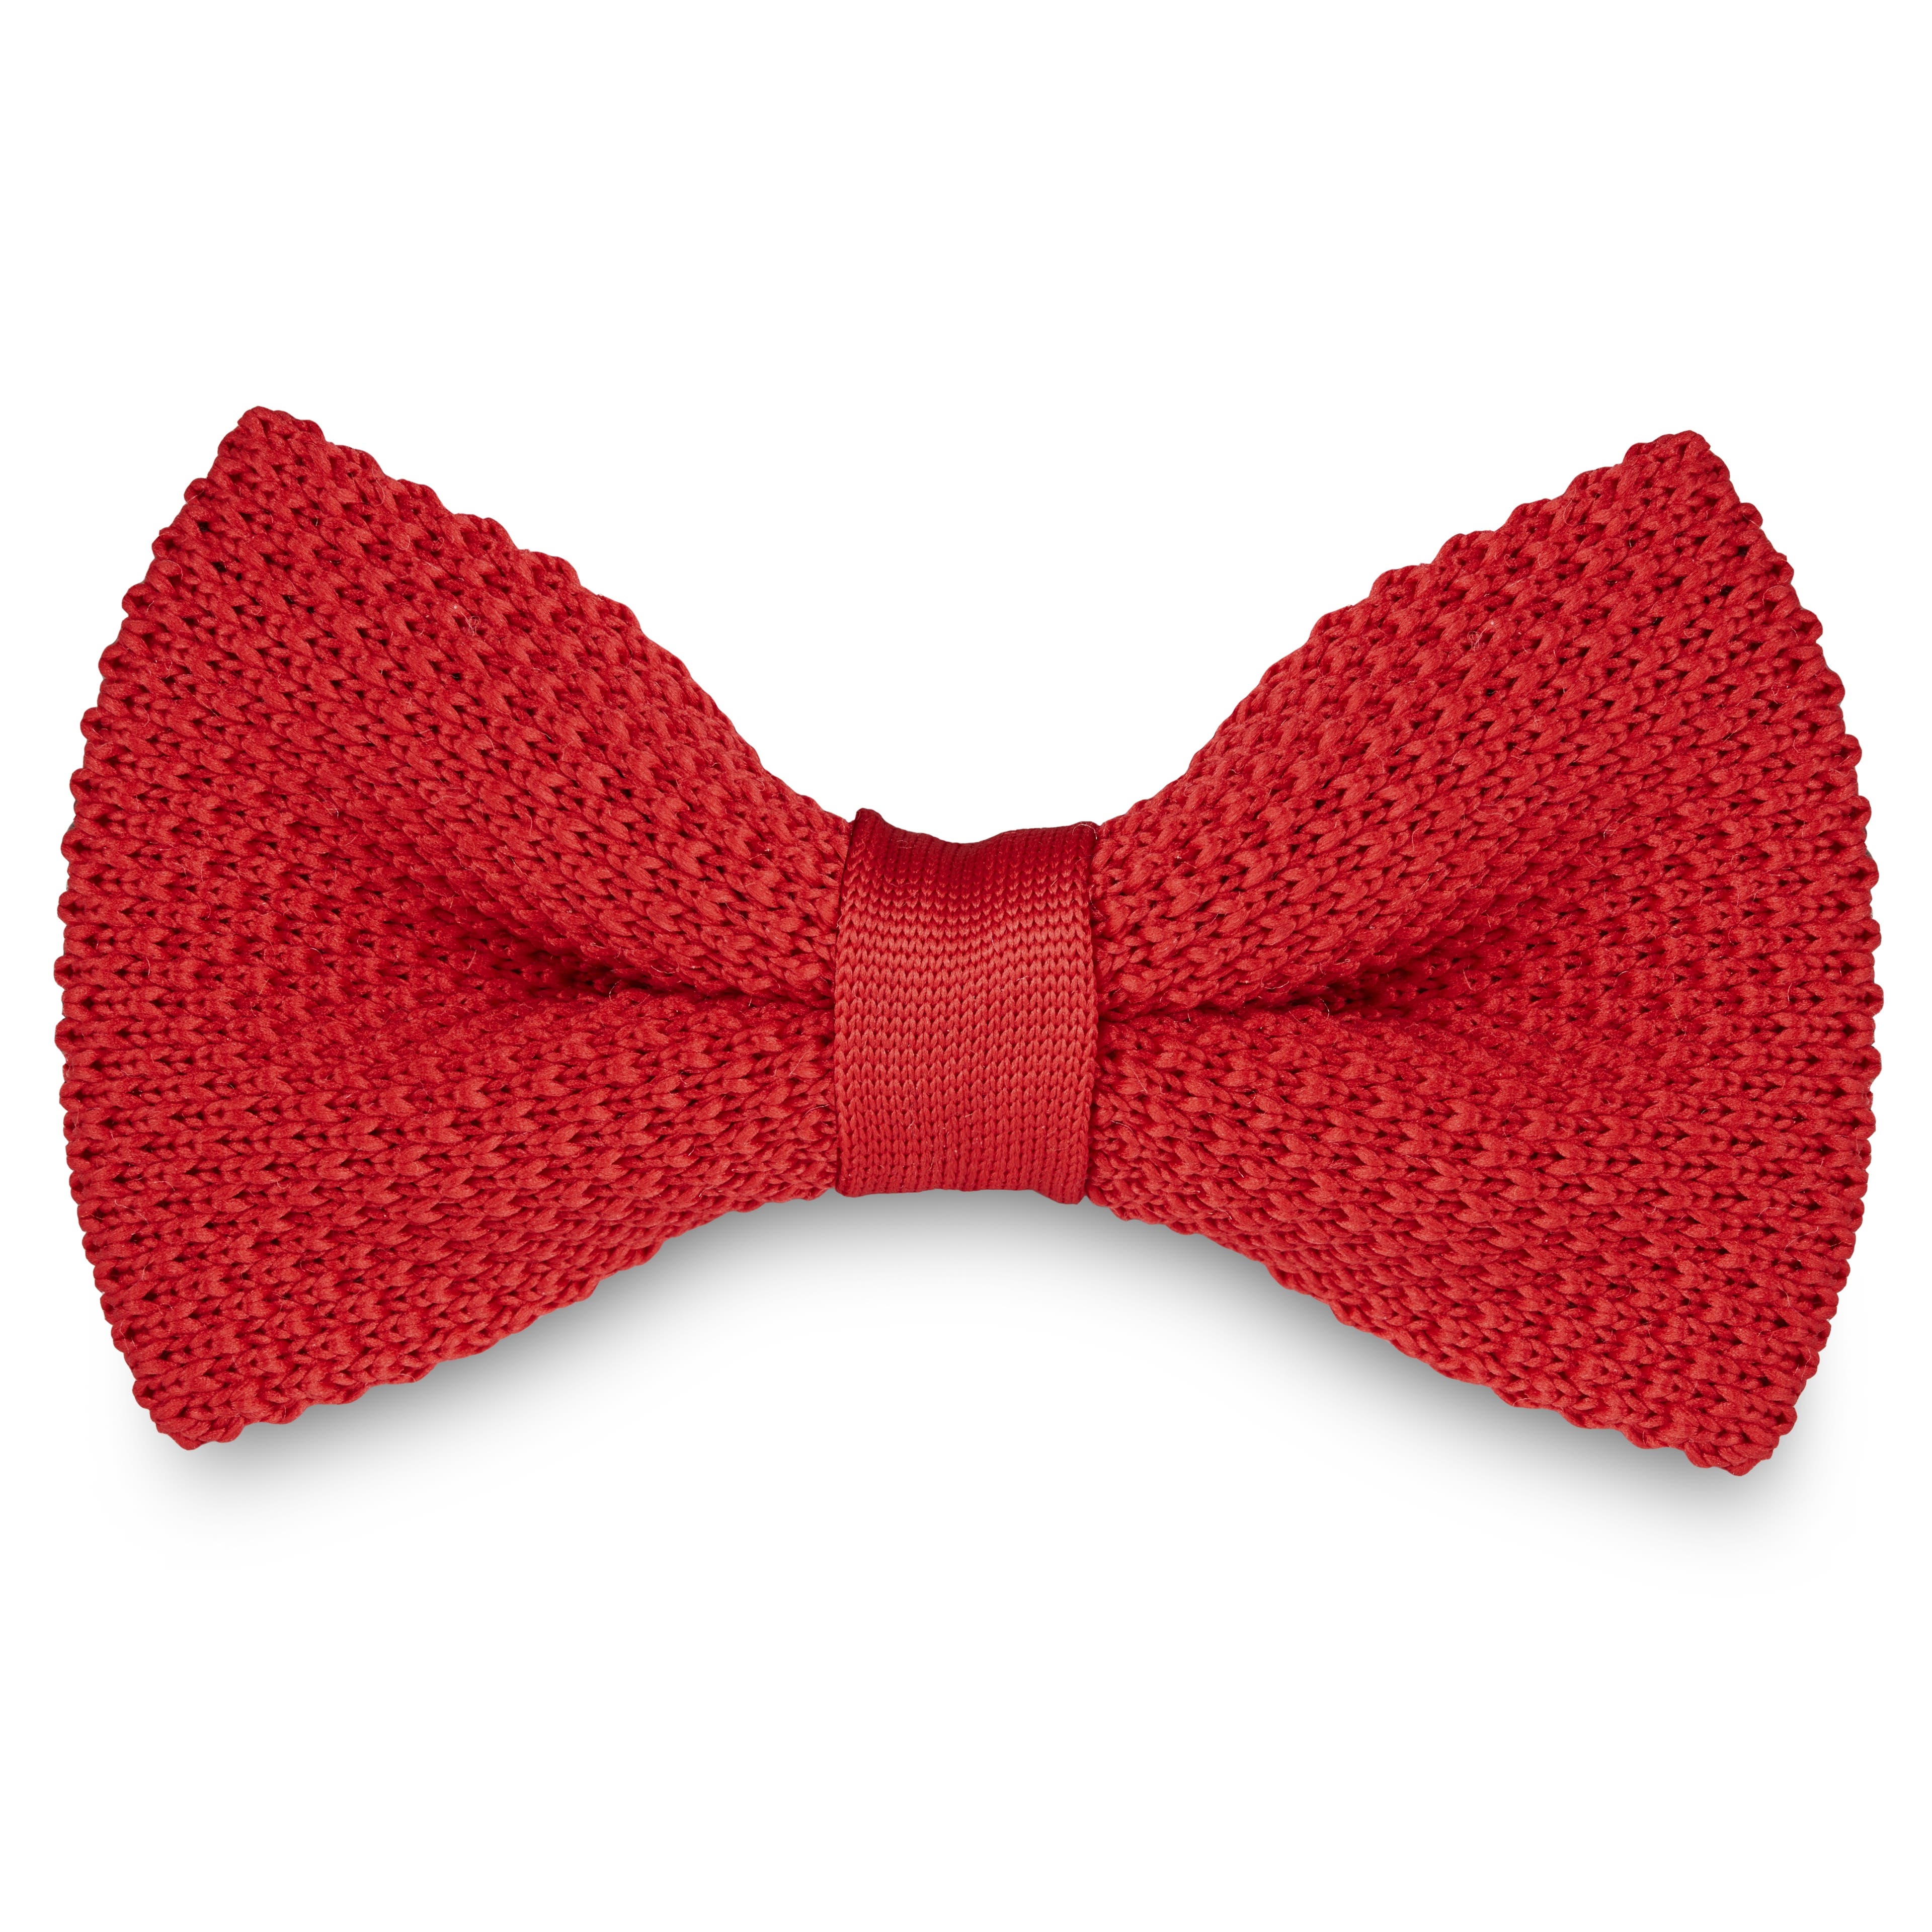 Red Knitted Pre-Tied Bow Tie